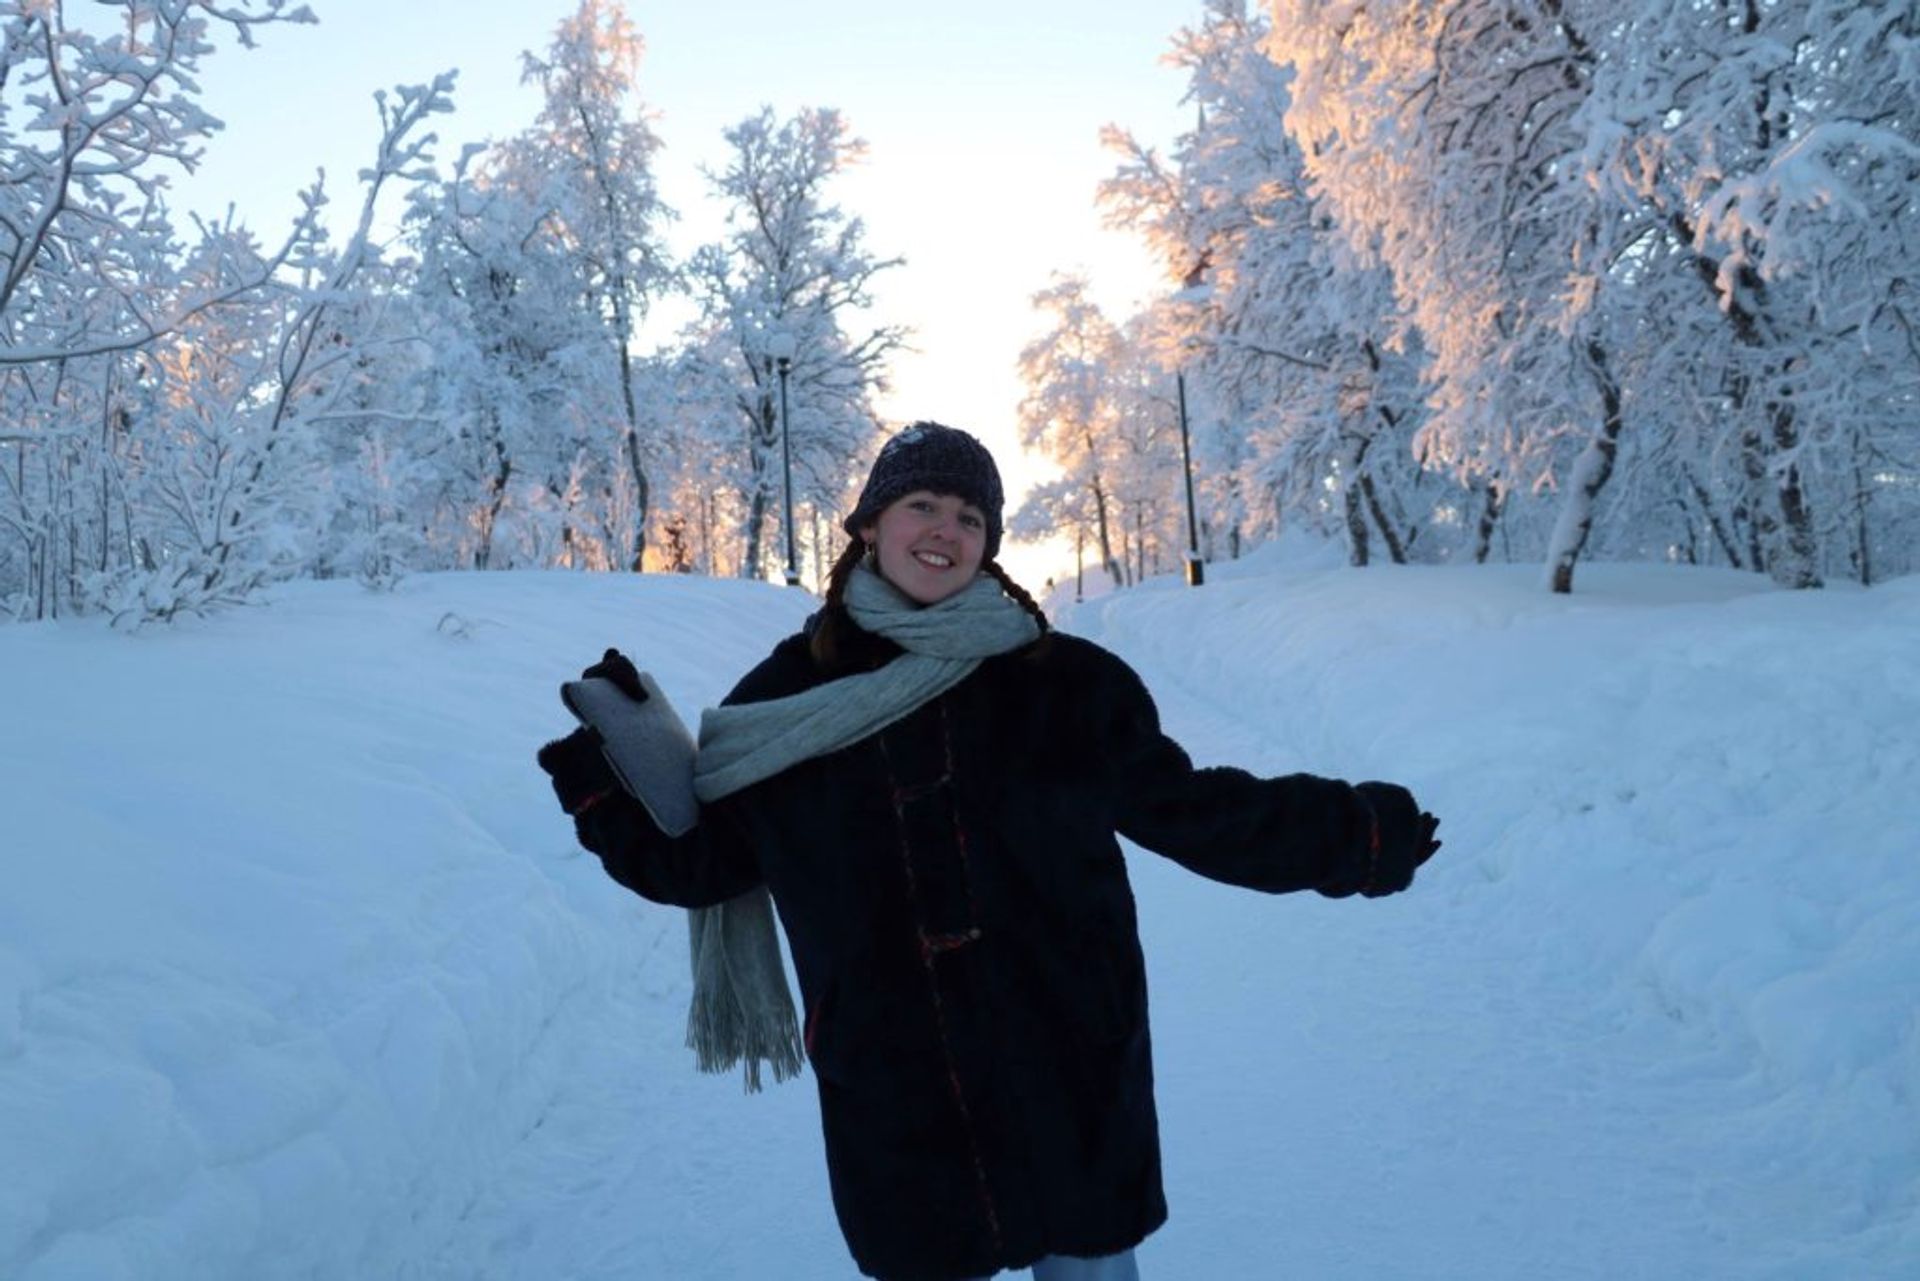 A woman on a really snowy day. It is all white, she is smiling and the sun is shining.